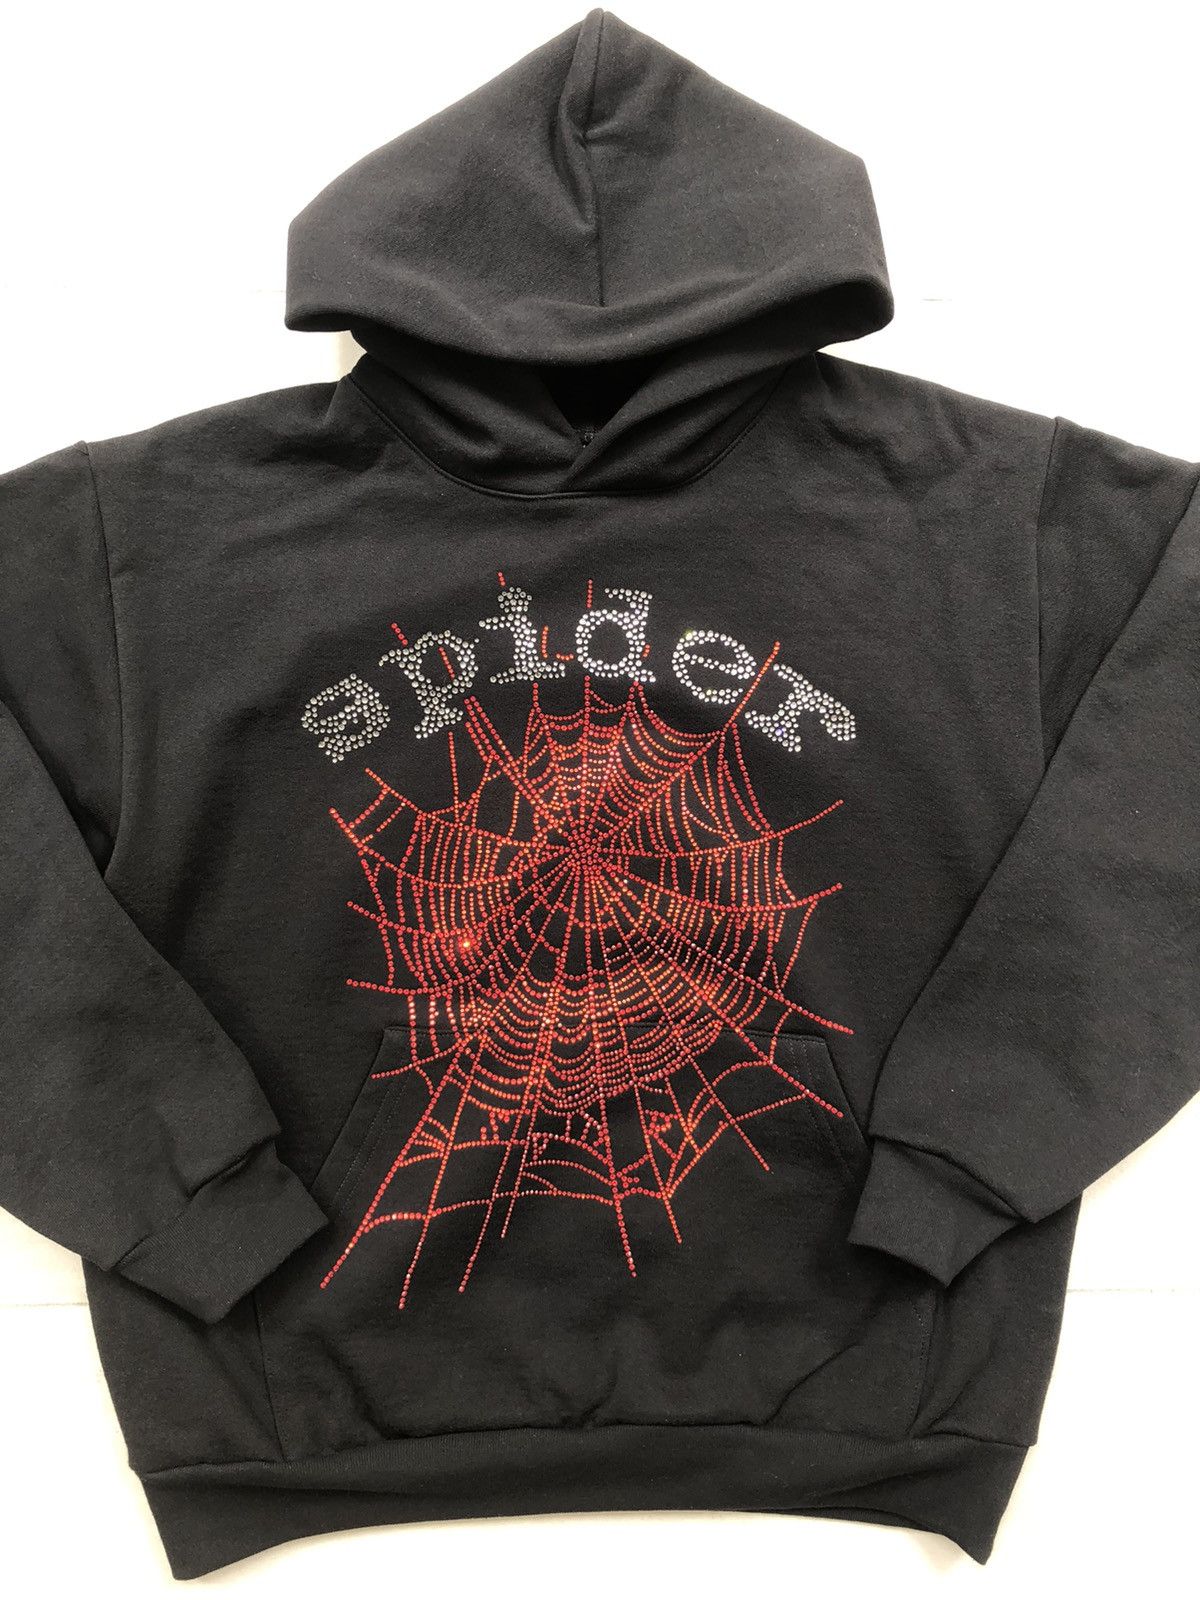 Young Thug Spider Worldwide OG Rhinestone Hoodie Size US L / EU 52-54 / 3 - 2 Preview